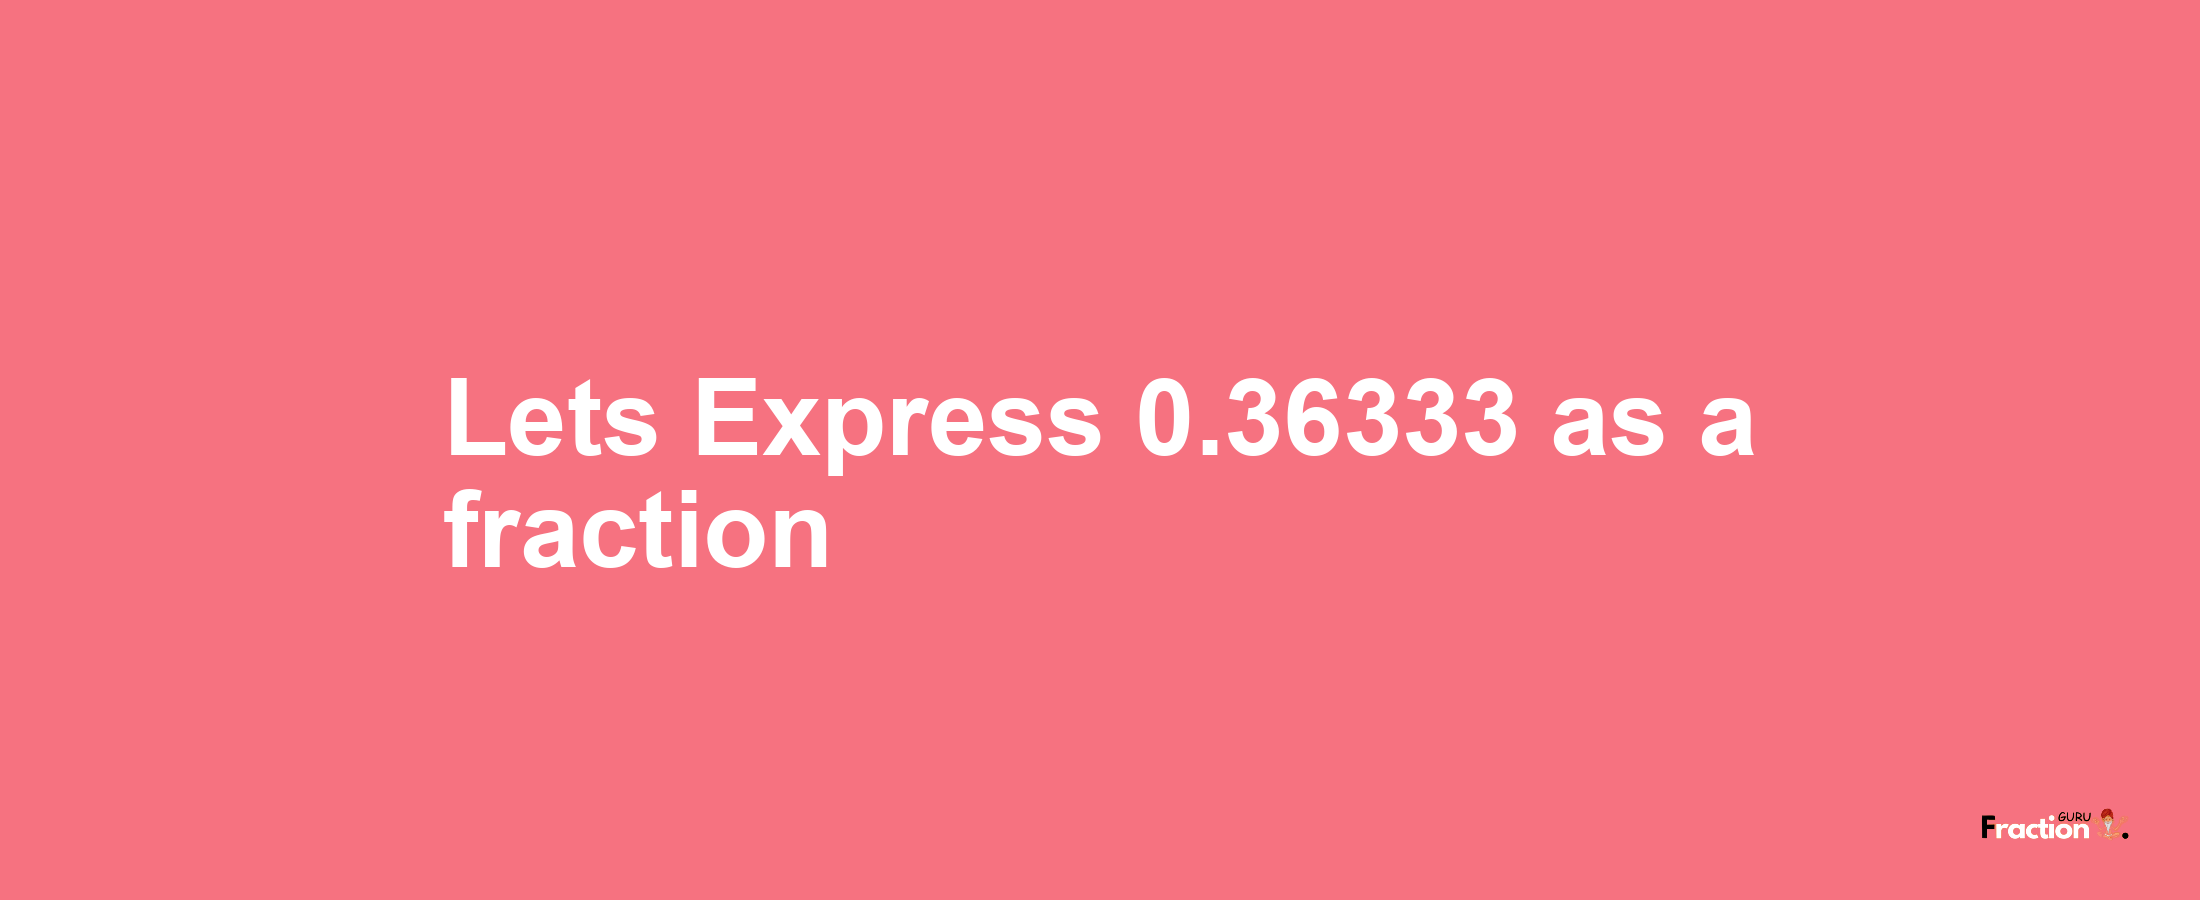 Lets Express 0.36333 as afraction